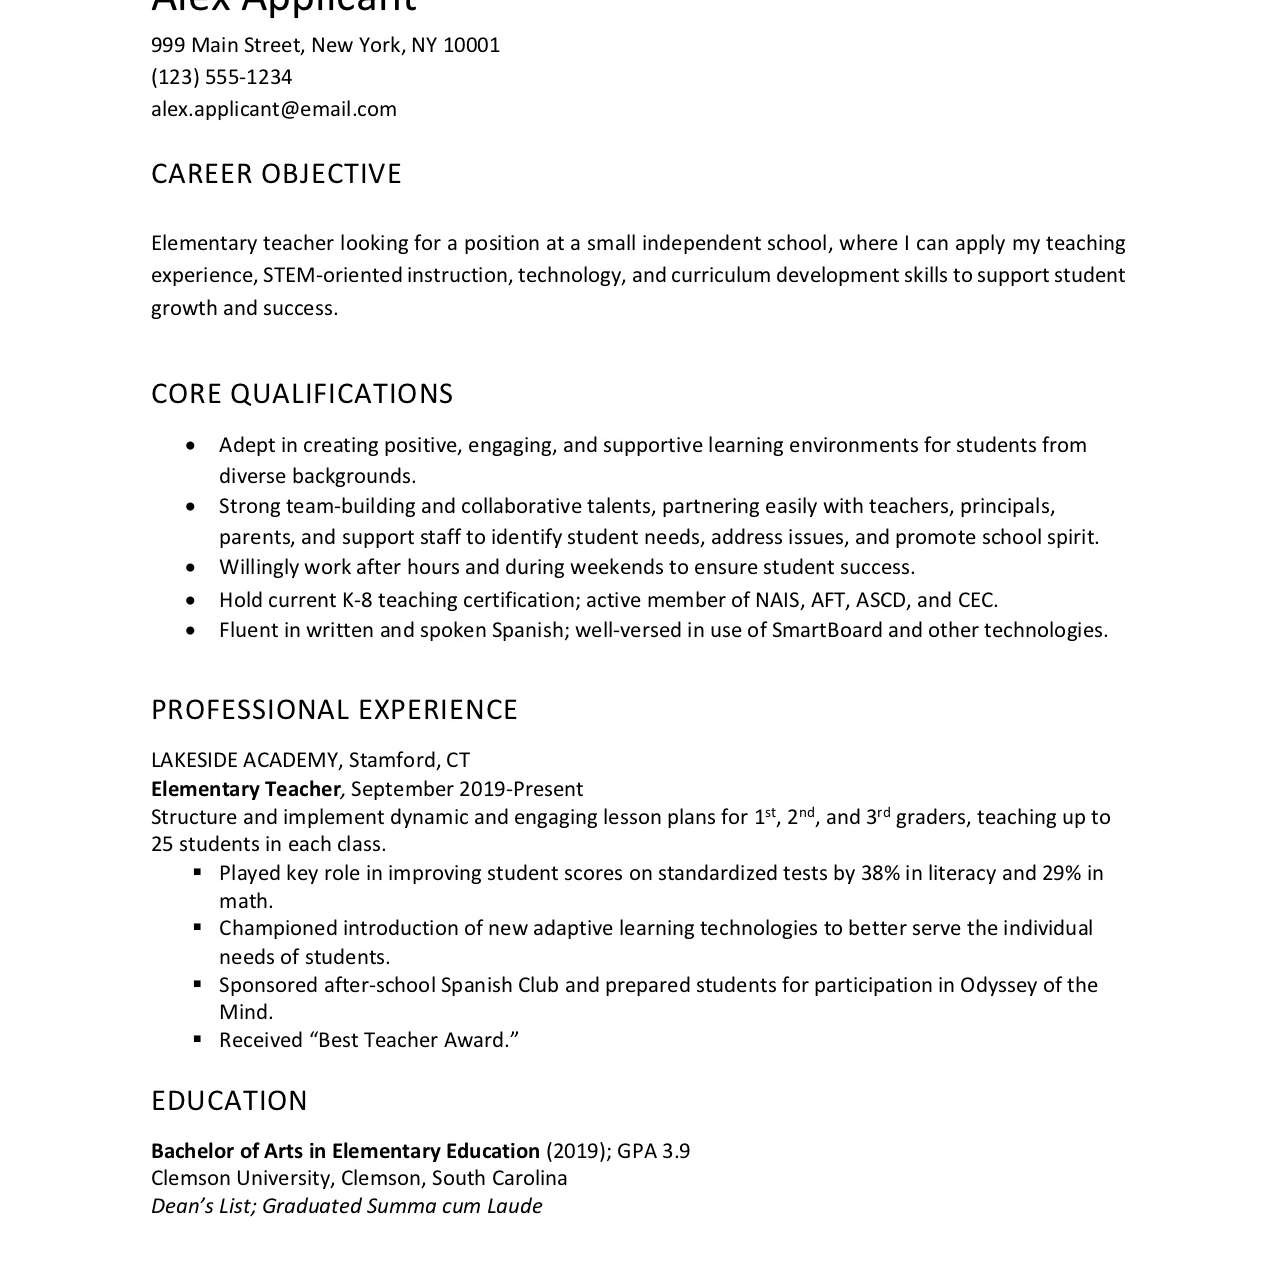 Resume Objective Samples for Experienced Professionals Resume Objective Examples and Writing Tips